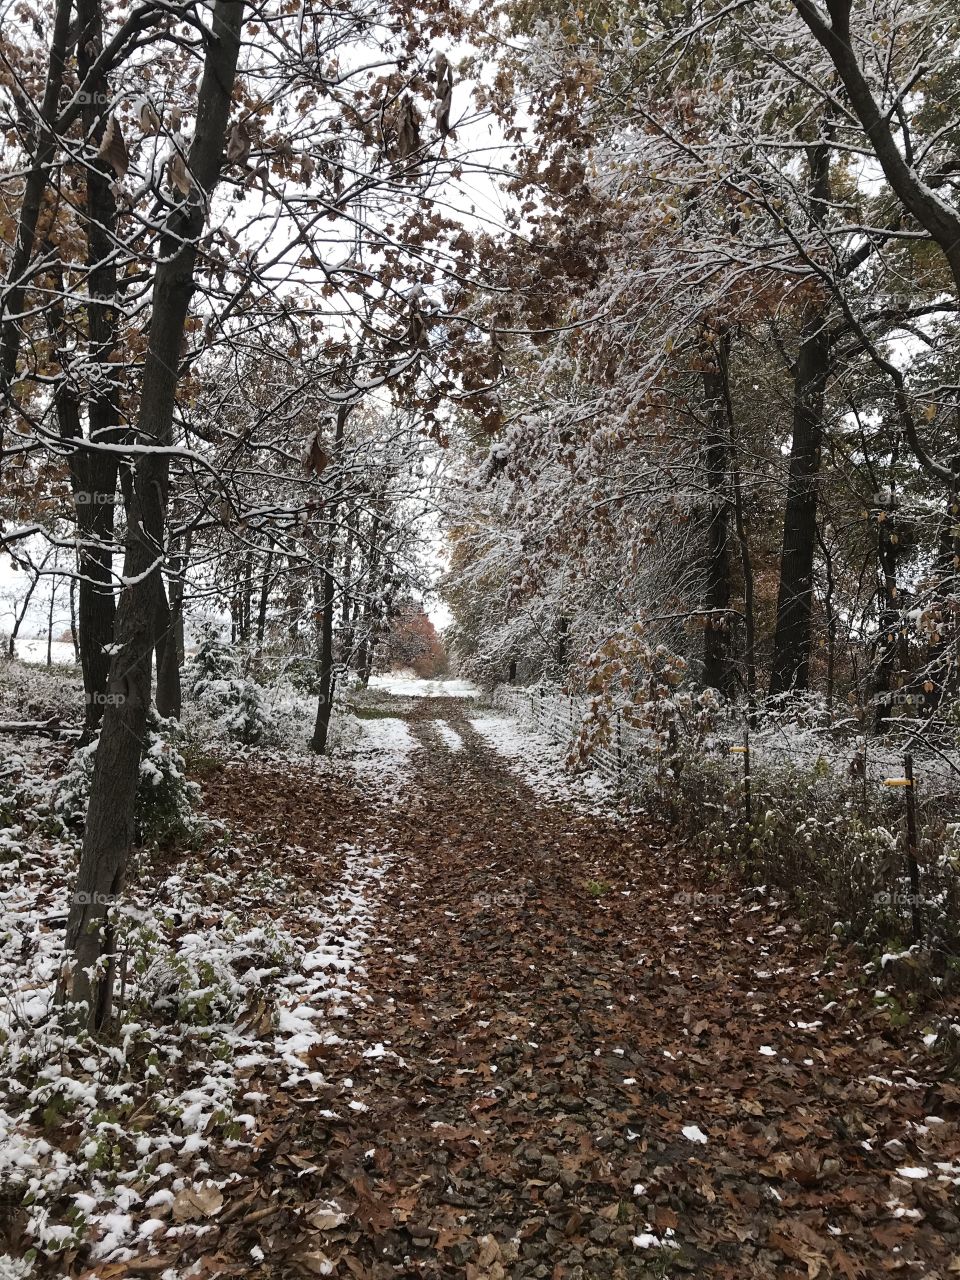 A peaceful trail covered with leaves winds through the woods, dusted with fresh snow.